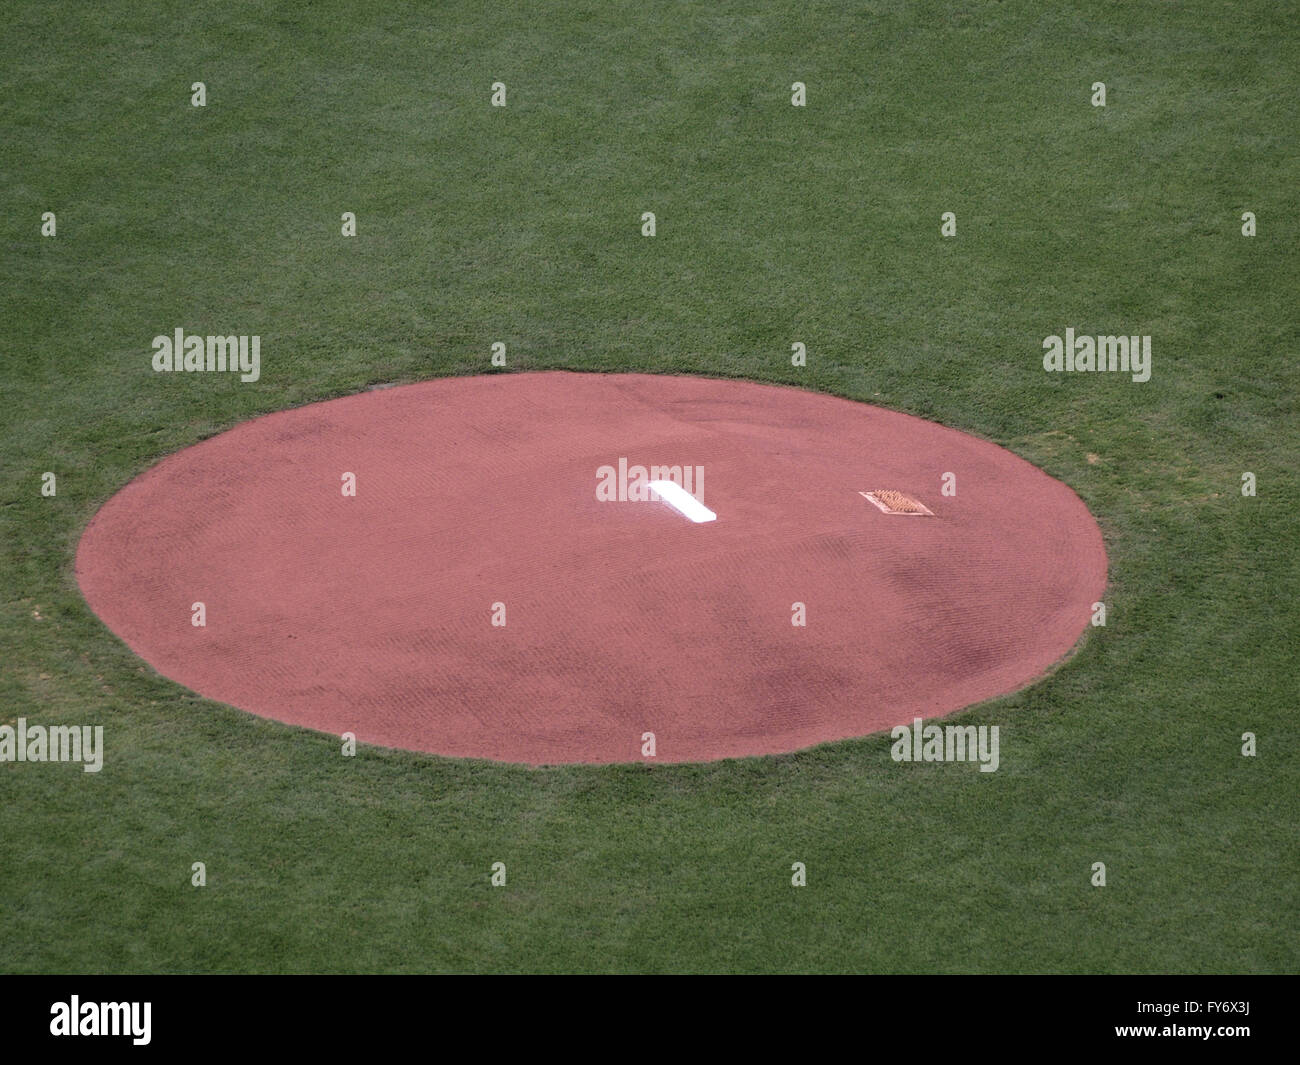 Baseball mound sits empty in pregame perfection before players begin destroying the surface with their clets. Stock Photo